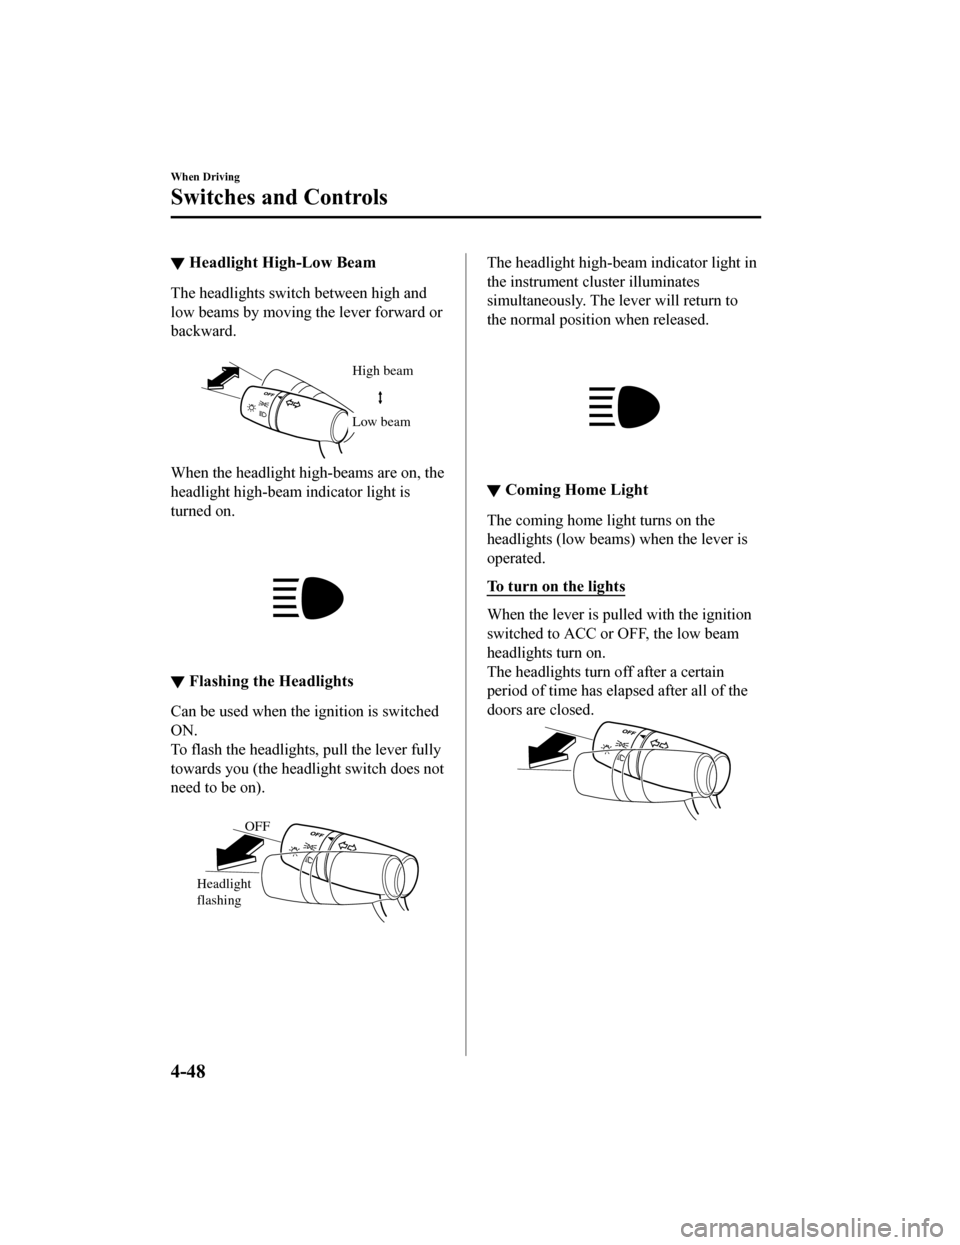 MAZDA MODEL MX-5 2020  Owners Manual (in English) ▼Headlight High-Low Beam
The headlights switch between high and
low beams by moving the lever forward or
backward.
 
High beam
Low beam
When the headlight high-beams are on, the
headlight high-beam 